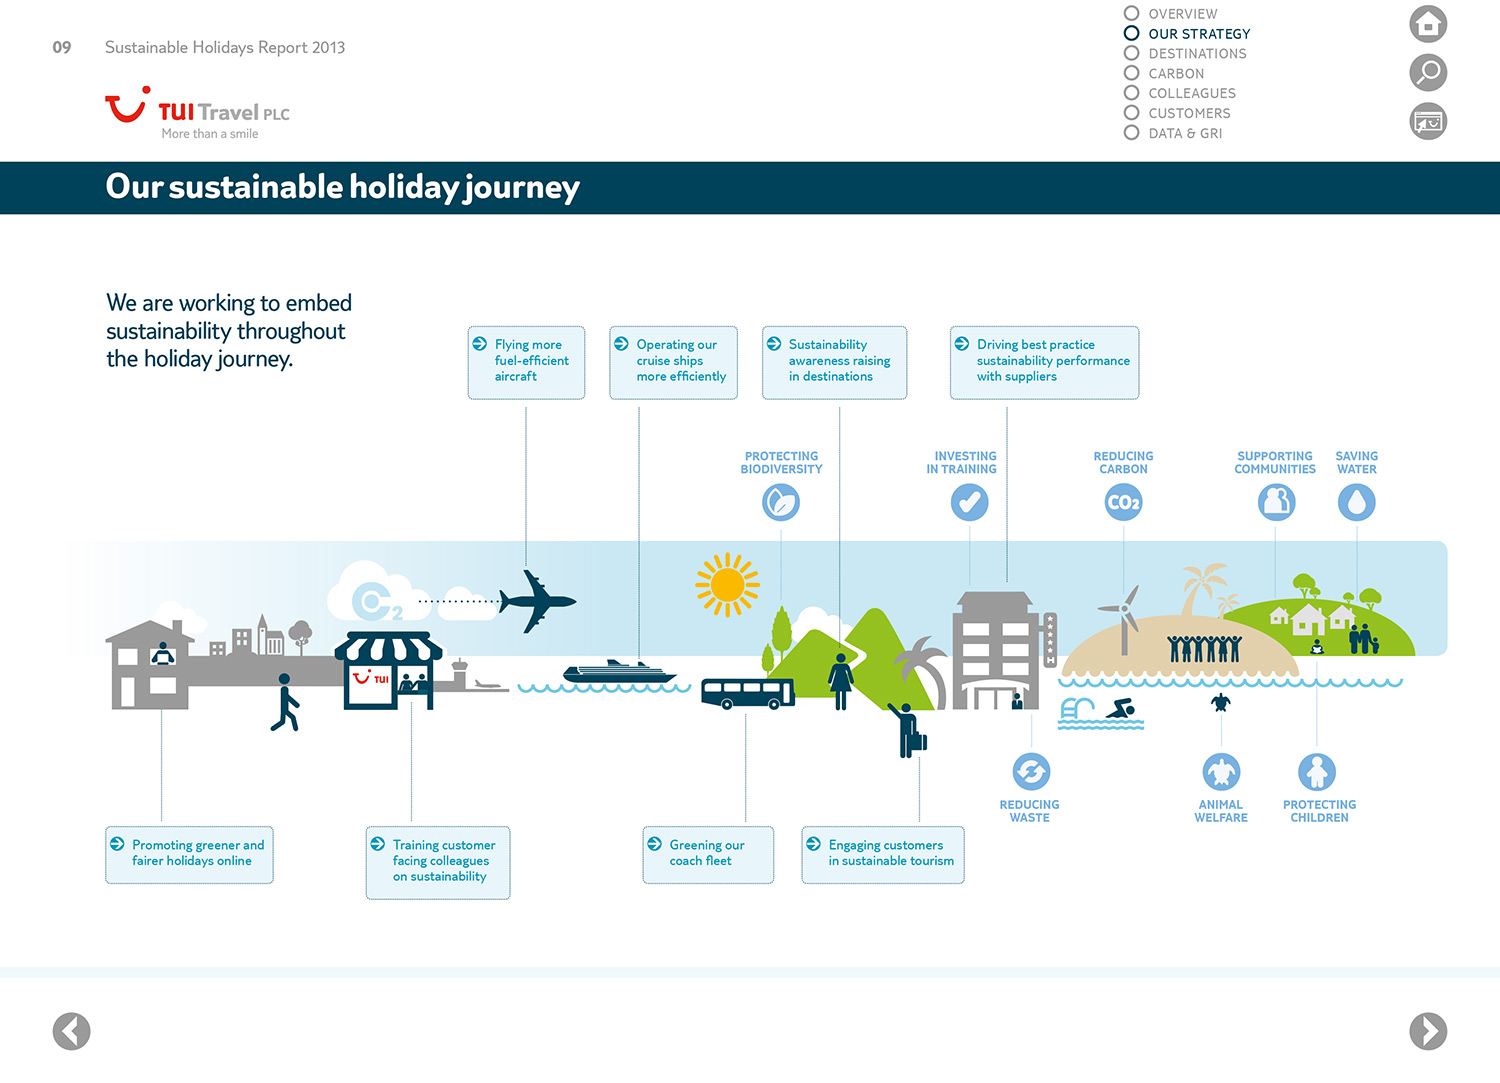 Analysis: Tui is edging closer to its ambitious green goals